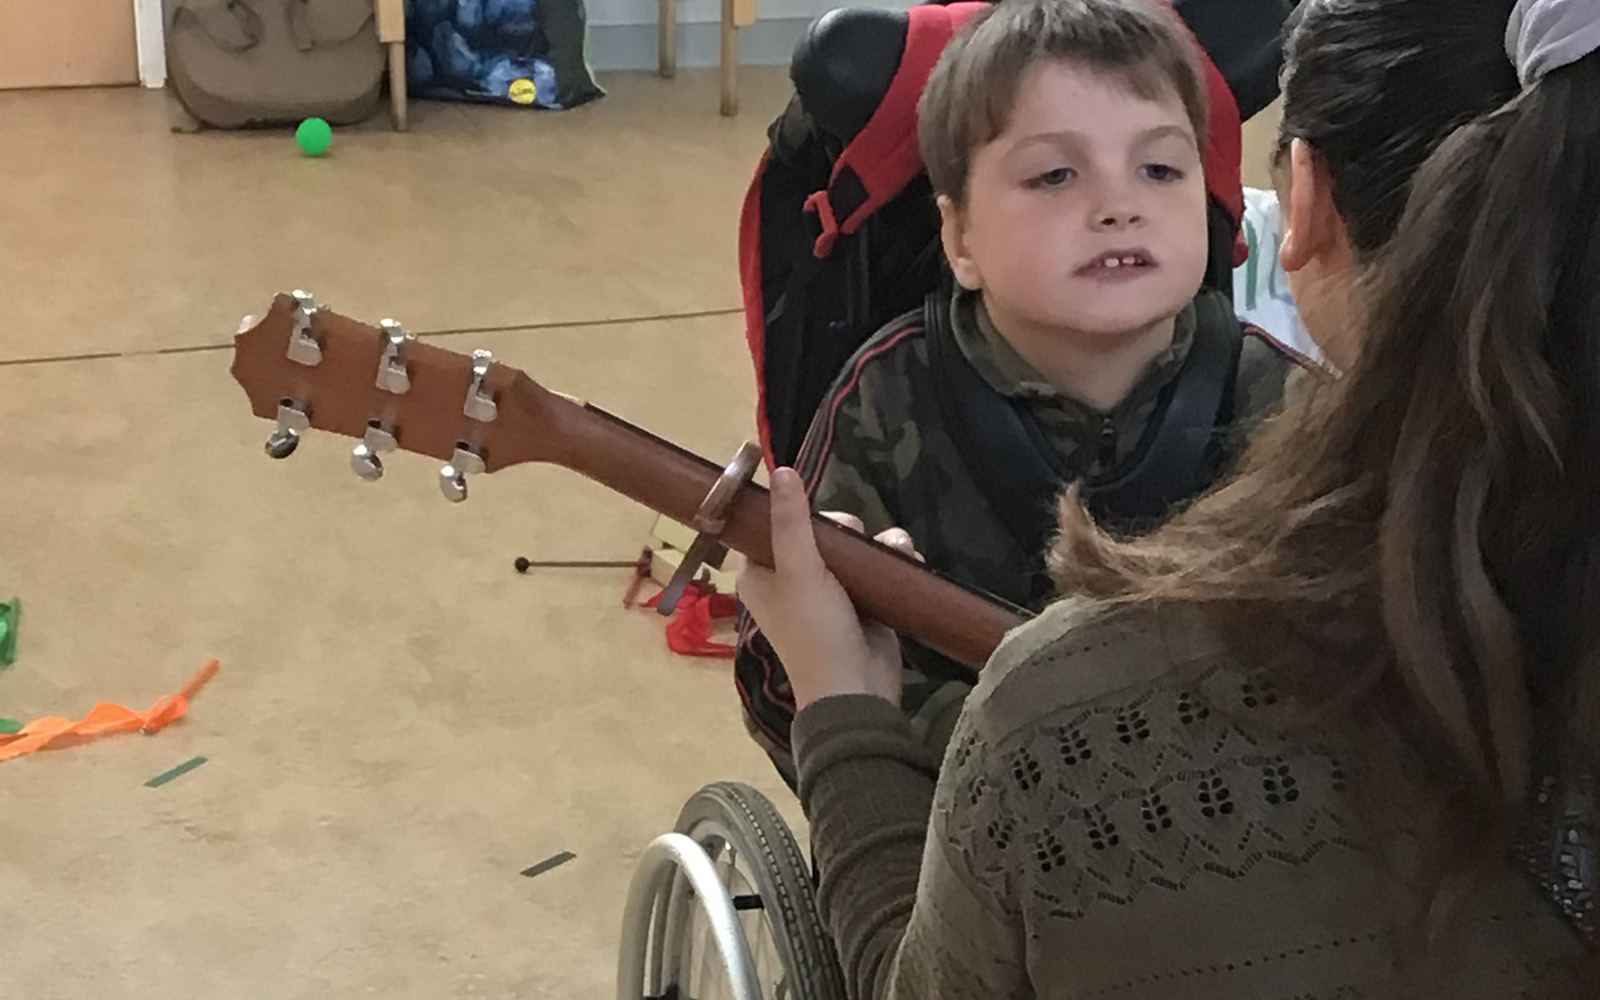 A young boy in a wheelchair listens and watches as a musician plays a guitar